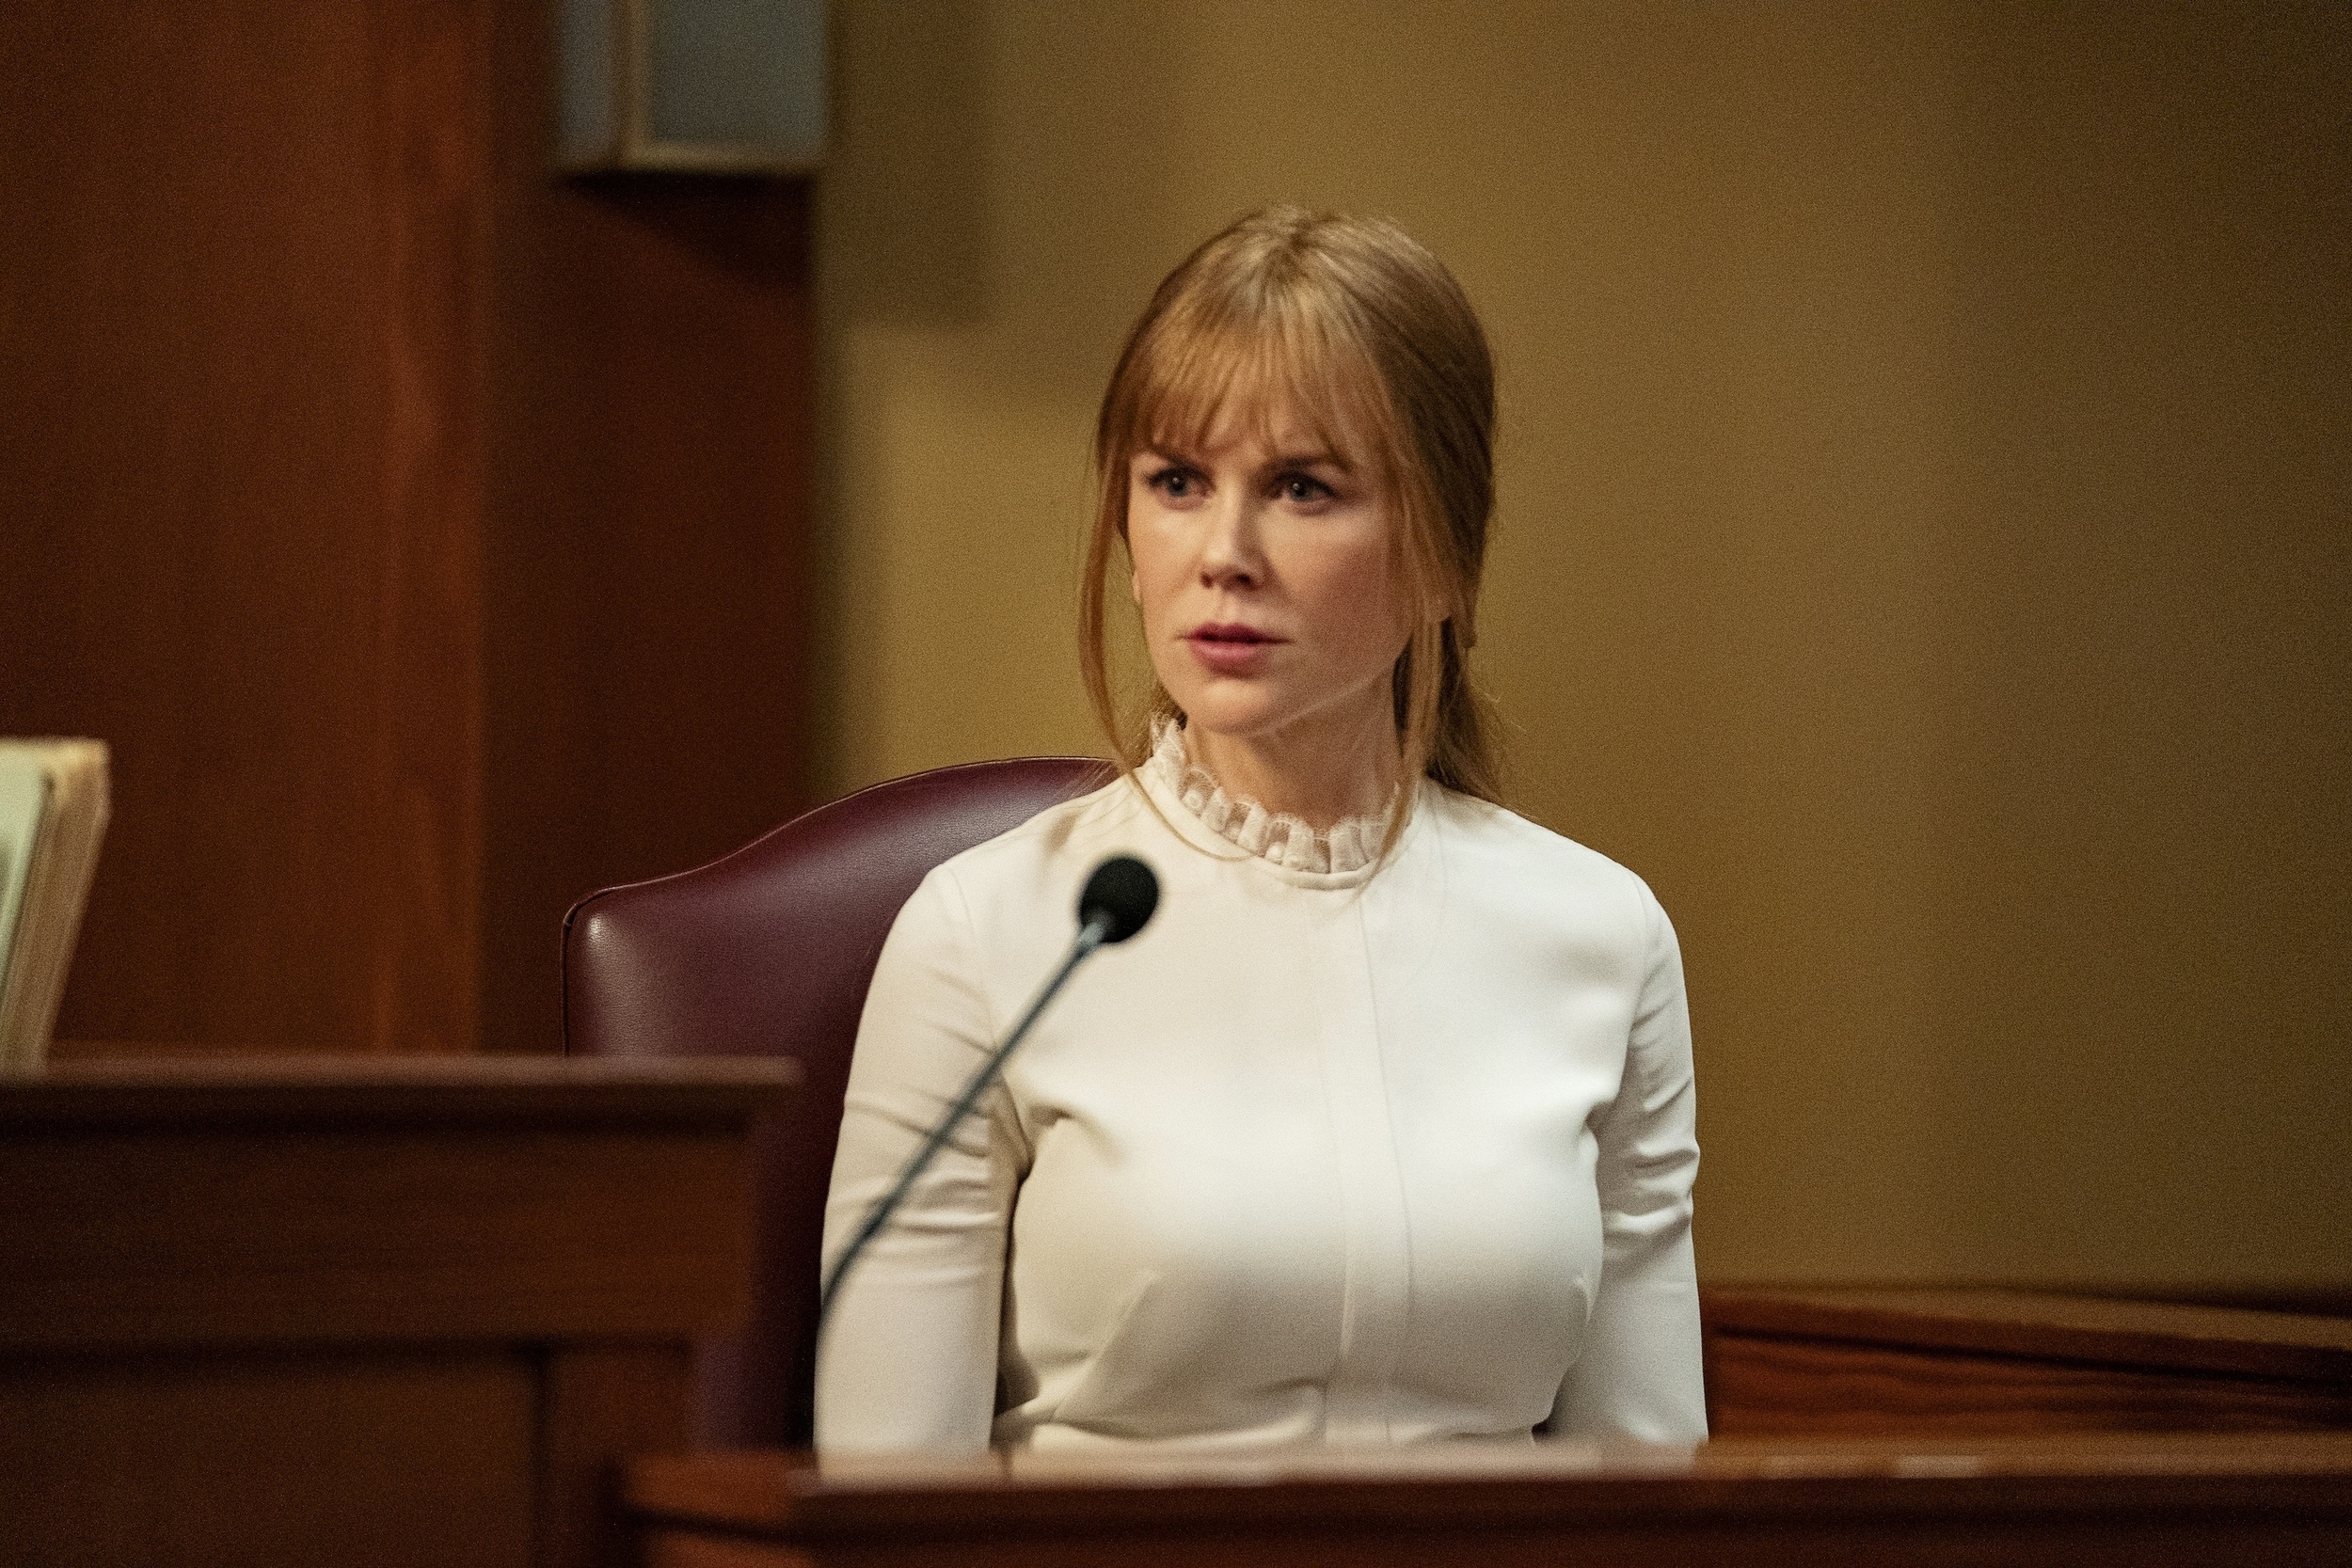 <p><em>Big Little Lies </em>was a massive “look, movie stars!” show. Hell, Meryl Streep joined the cast for the second season. However, the actor we are using as the stand-in for the <em>Big Little Lies</em> cast is Nicole Kidman, an Oscar winner and one of the biggest film stars out there for a time. Kidman also won an Emmy for the show because, come on, of course, she did.</p><p>You may also like: <a href='https://www.yardbarker.com/entertainment/articles/the_25_best_rock_n_roll_anthems_012324/s1__32645717'>The 25 best rock 'n' roll anthems</a></p>